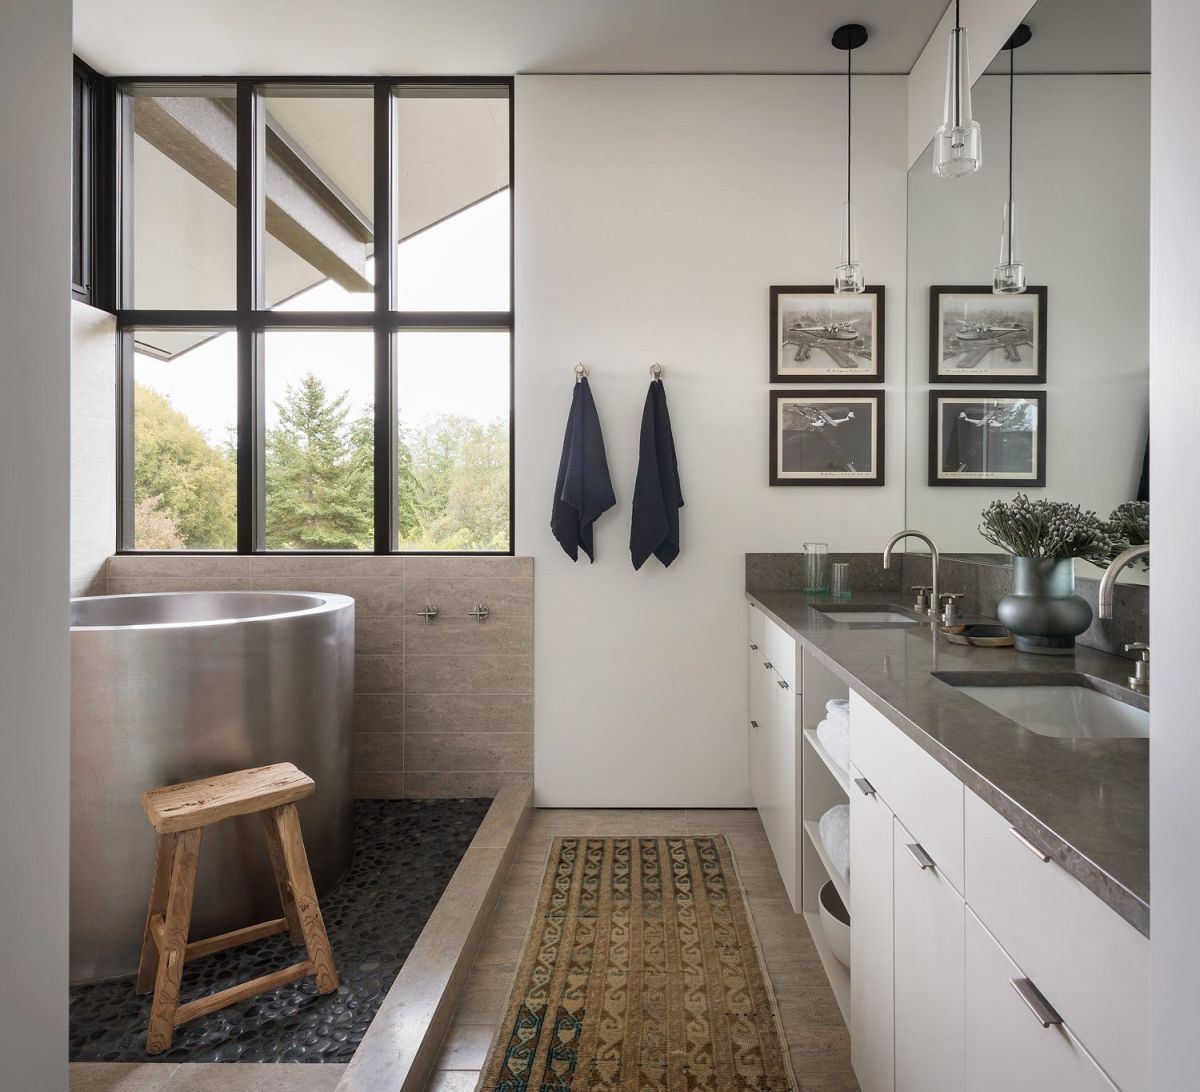 A soak tub is placed next to the window to enjoy the views